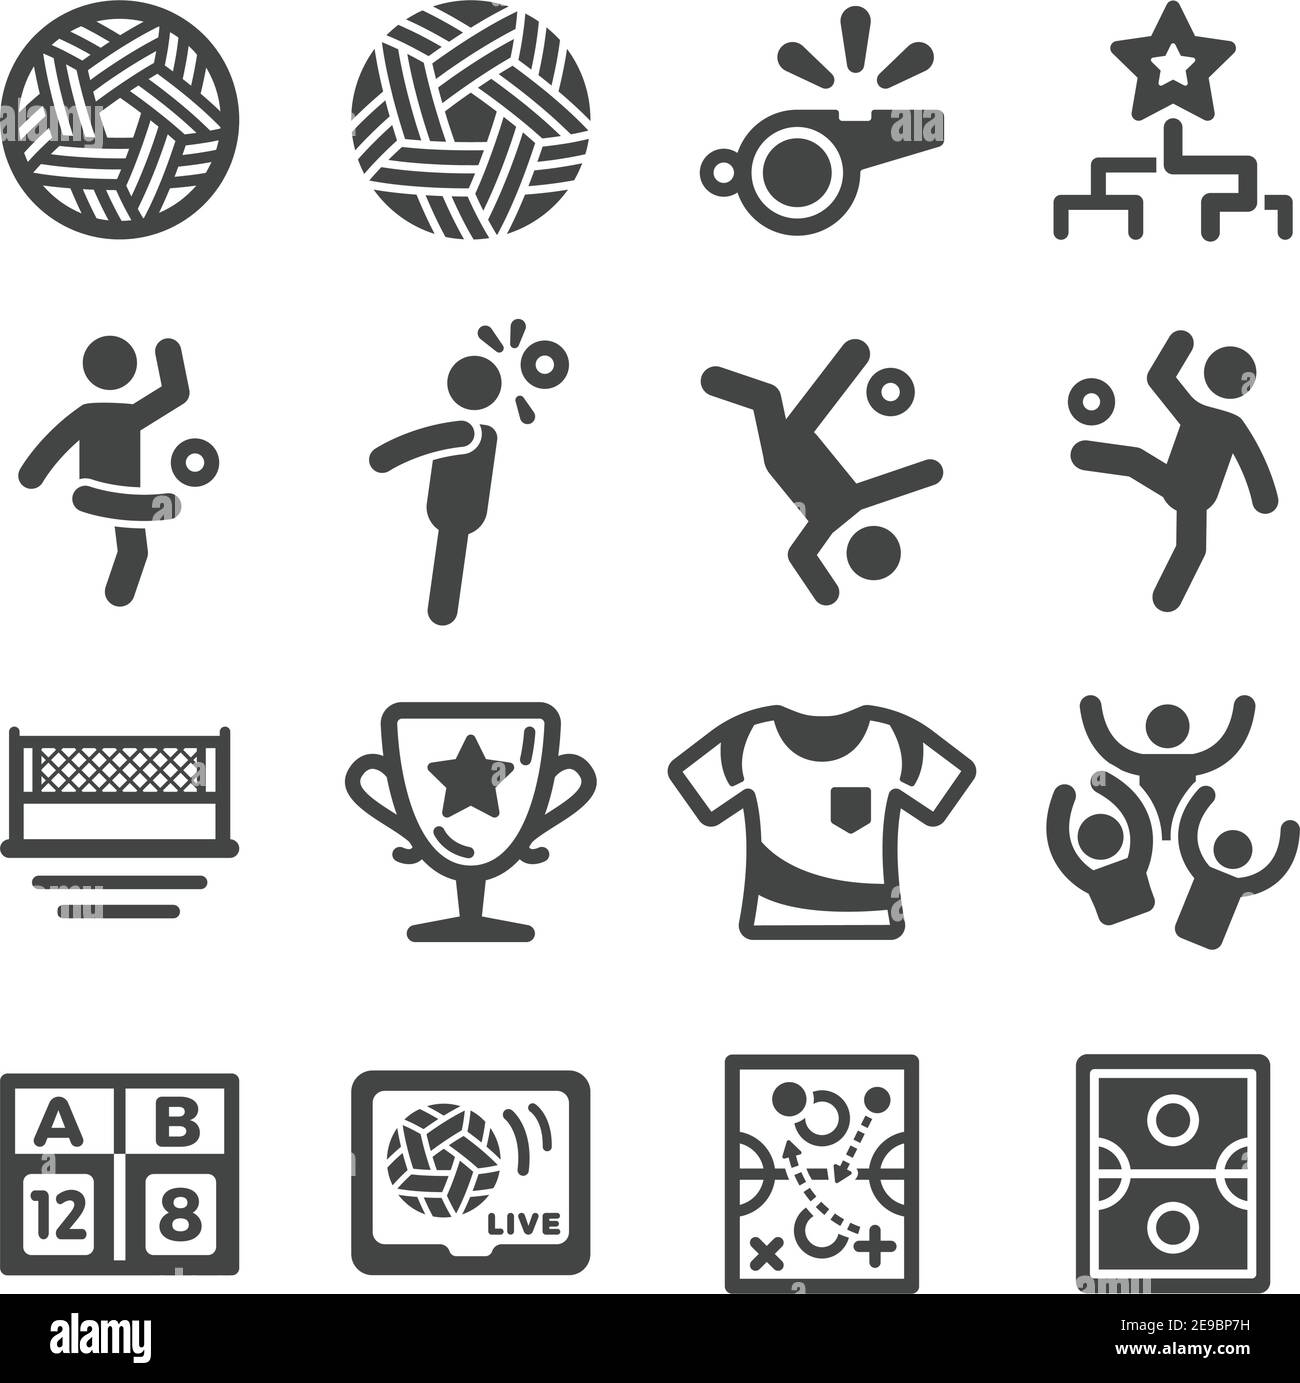 sepak takraw sport and recreation icon set,vector and illustration Stock Vector